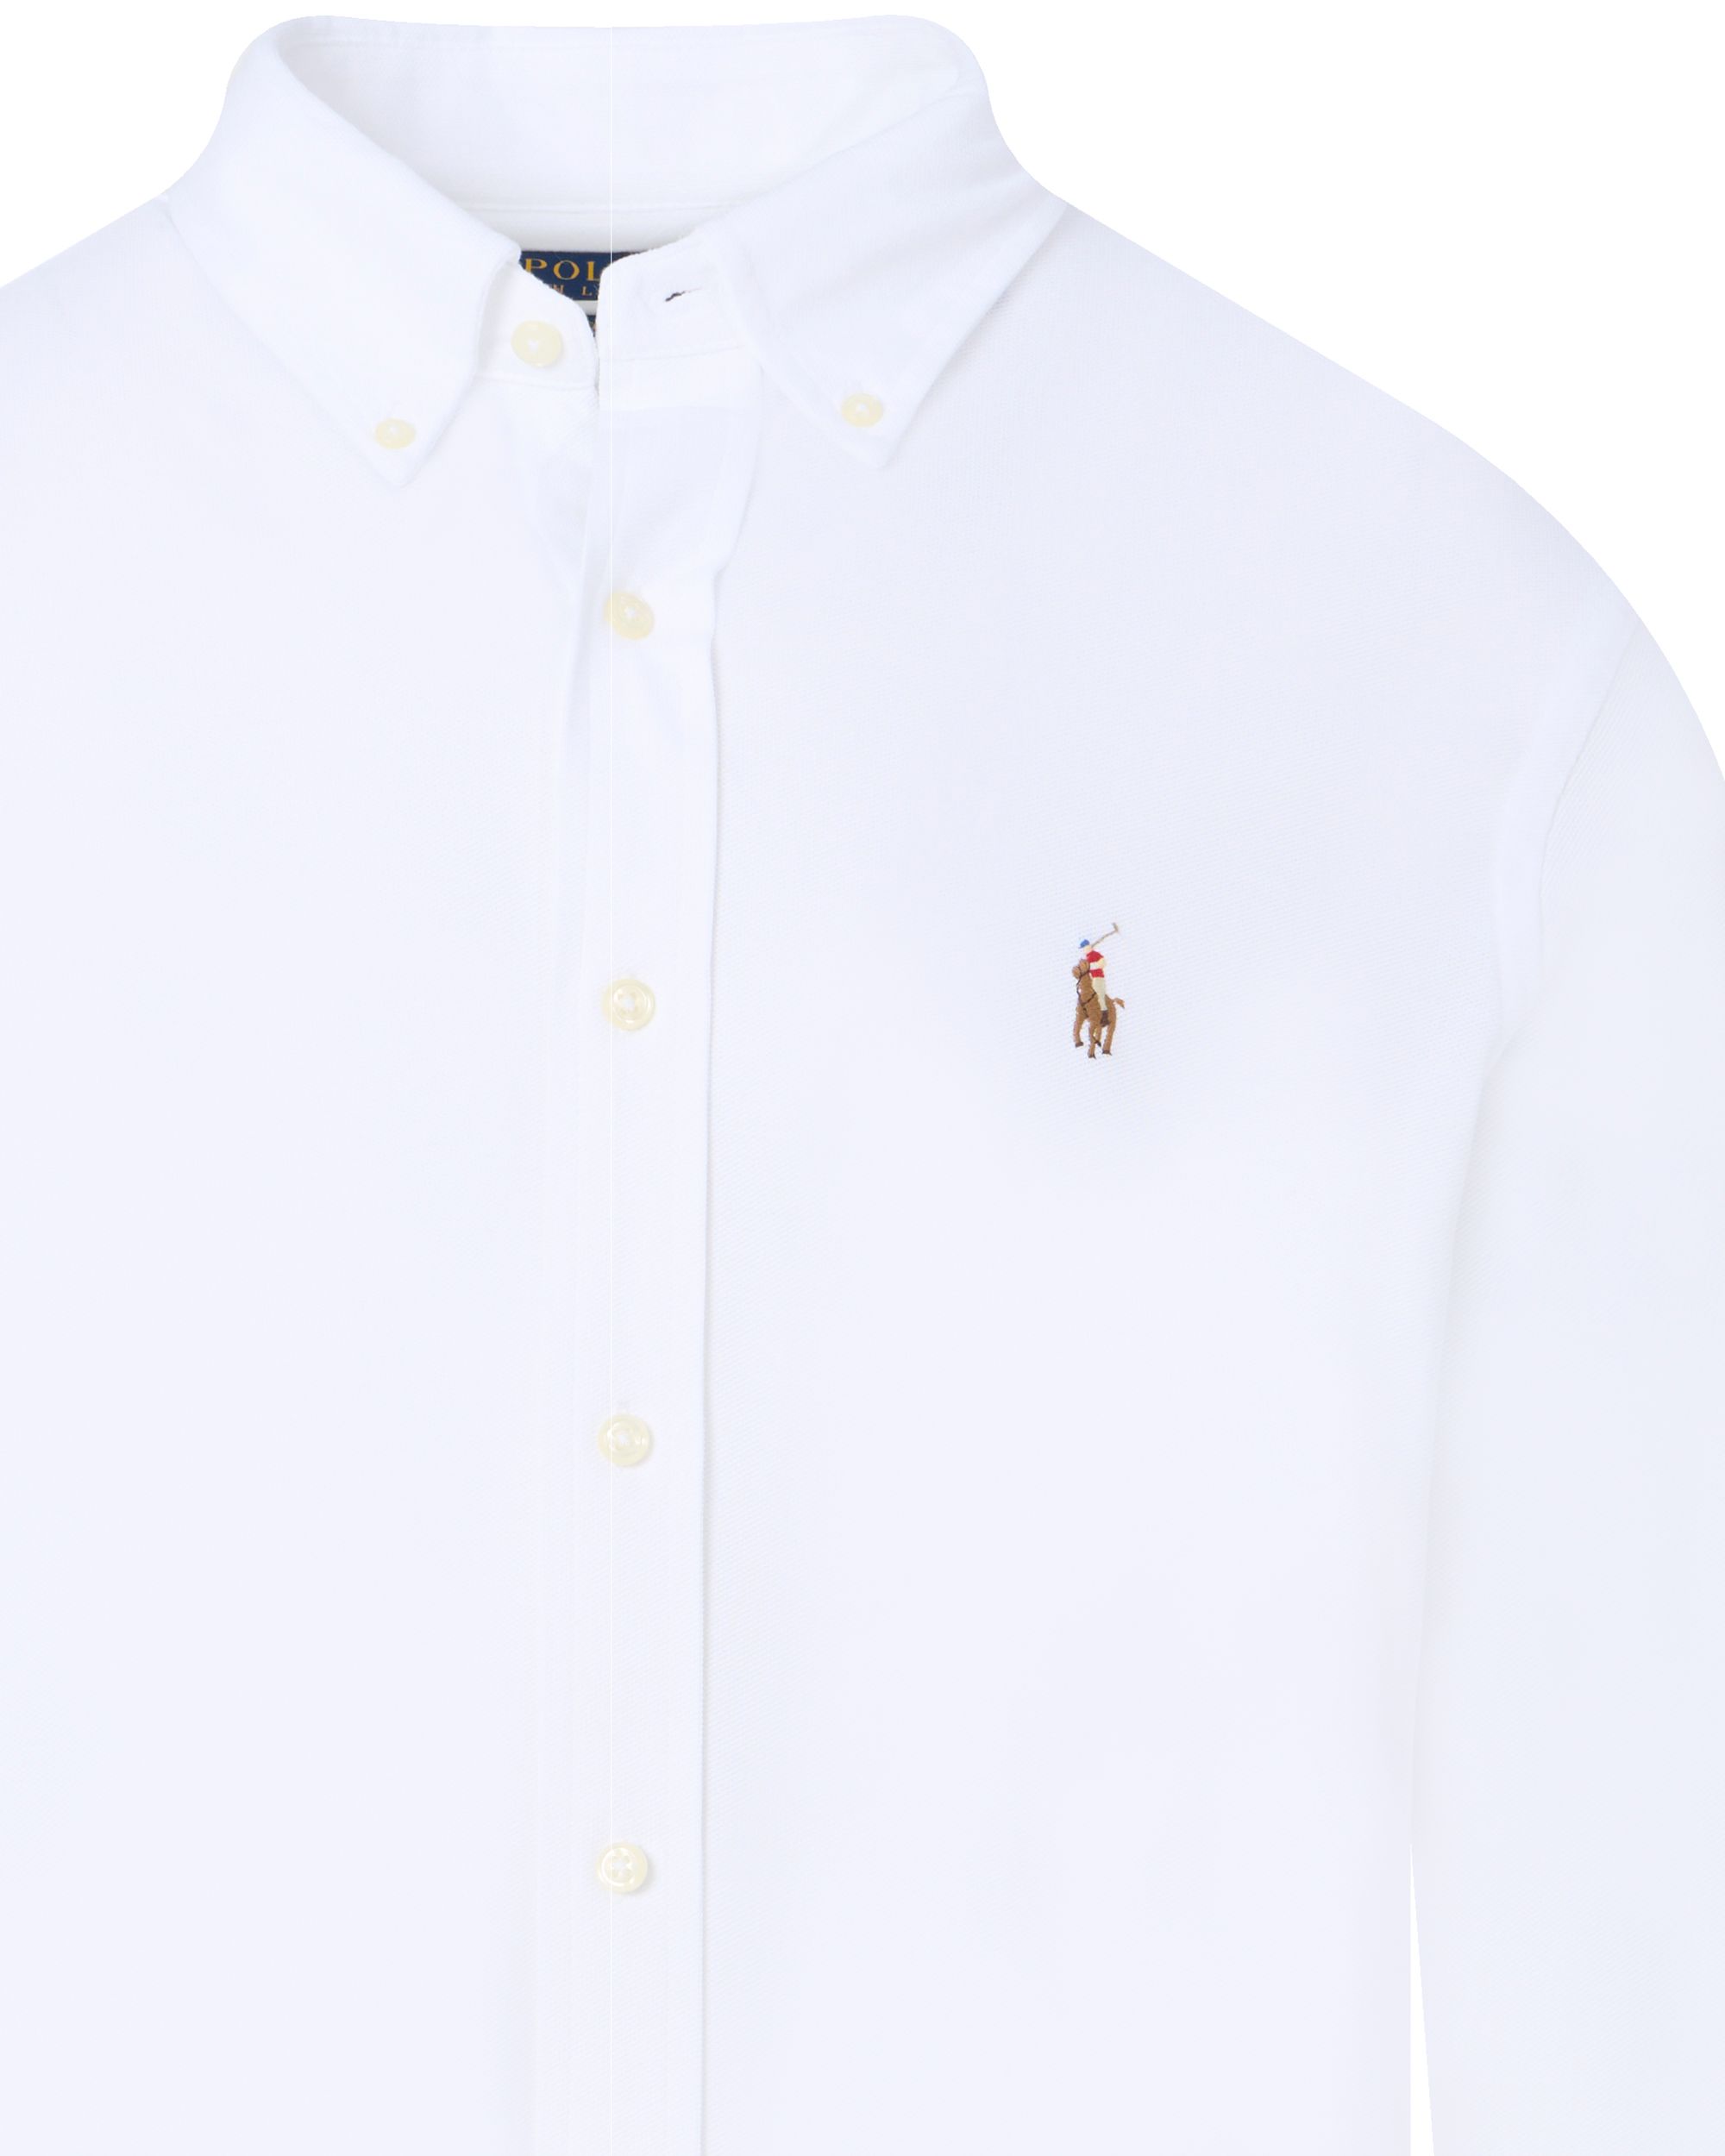 Polo Ralph Lauren Casual Overhemd LM Wit 091538-001-L